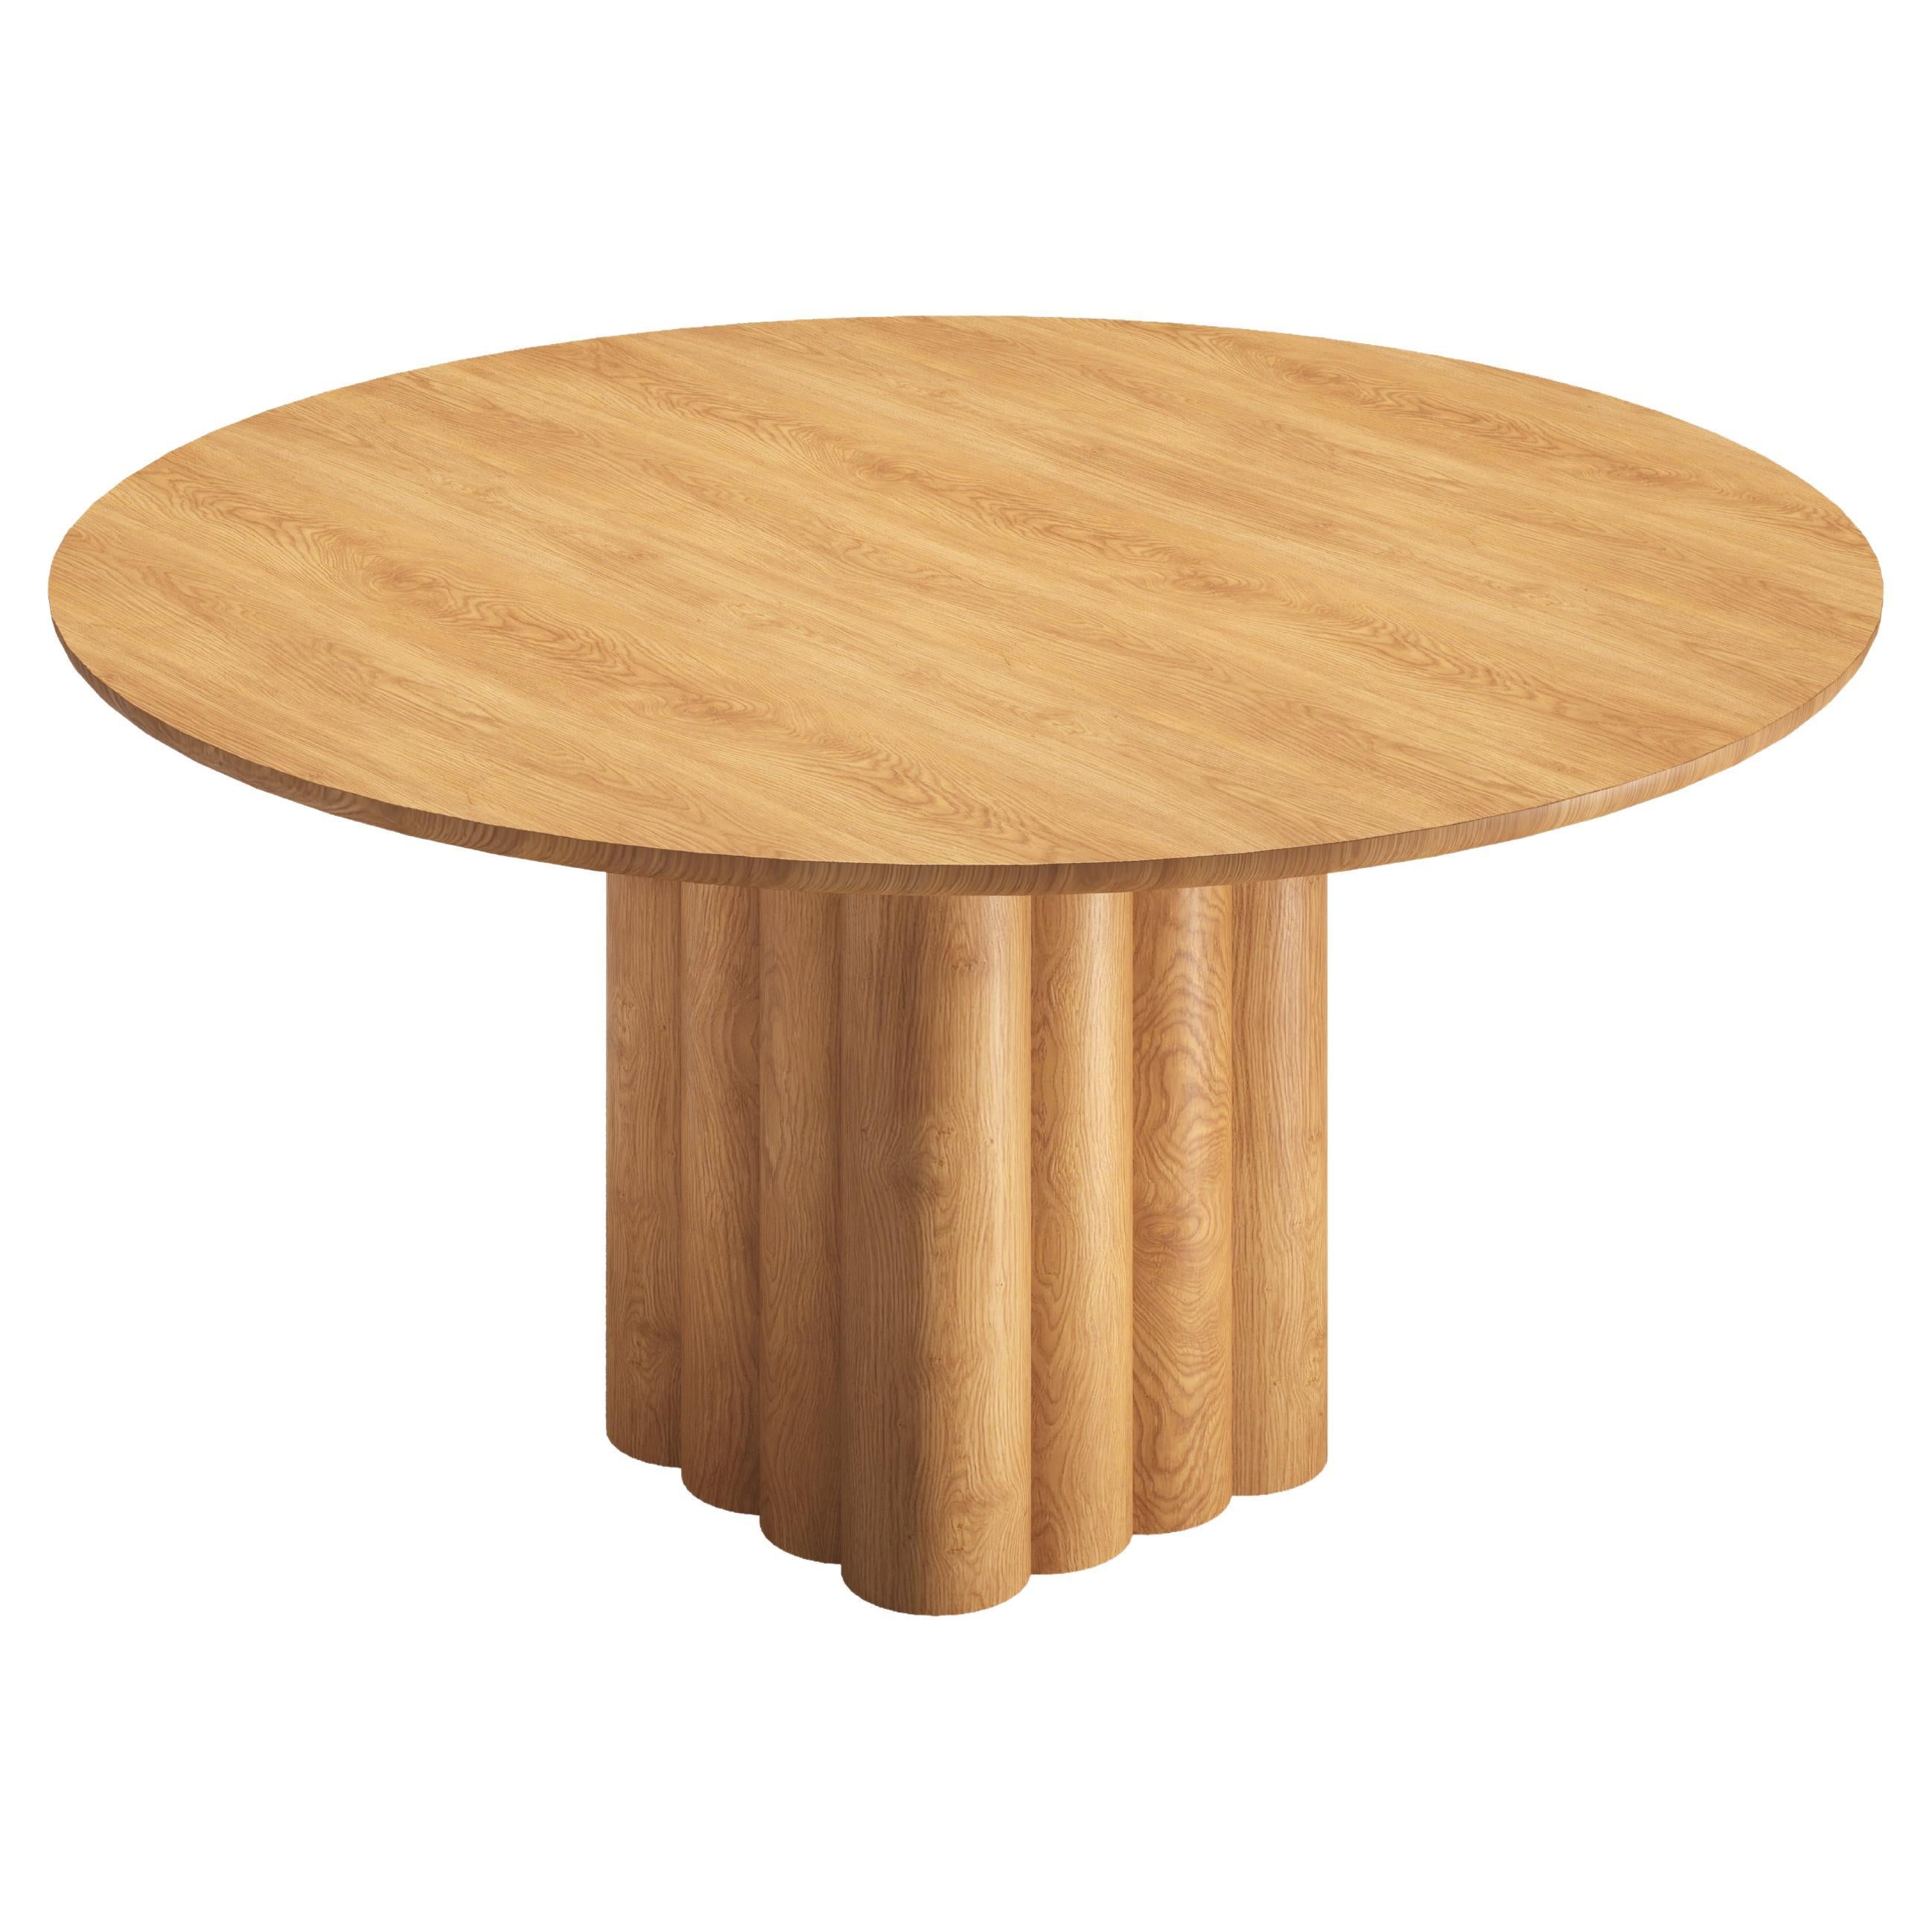 Round Dining Table 'Plush' by Dk3, Natural Oak, 160 cm For Sale